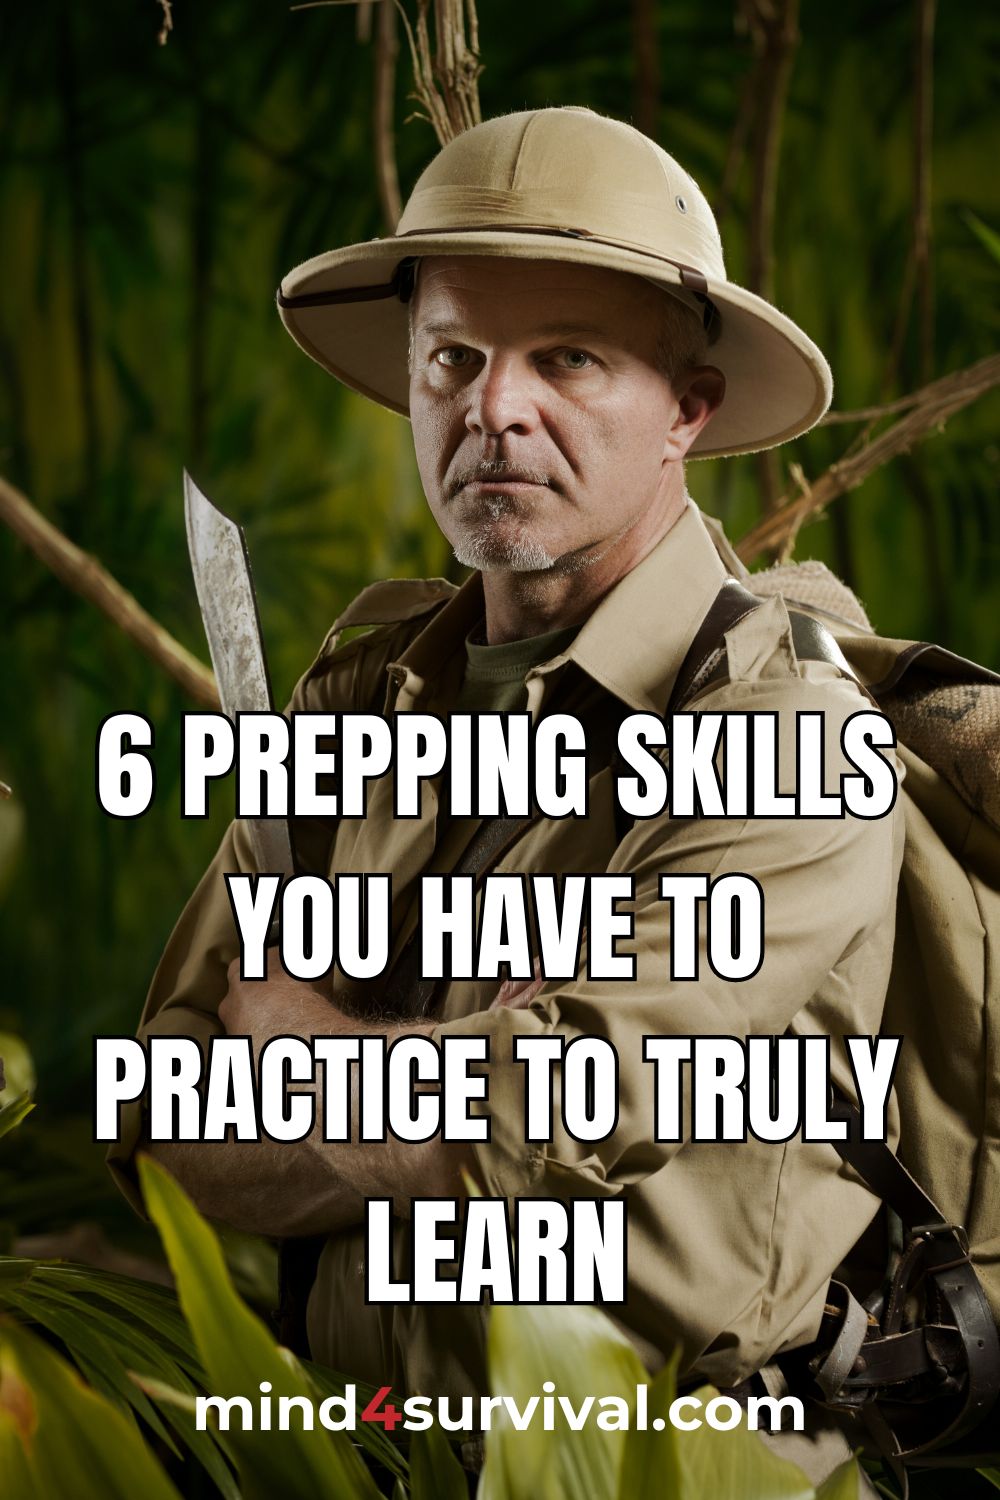 6 Prepping Skills You Have to Practice to Truly Learn